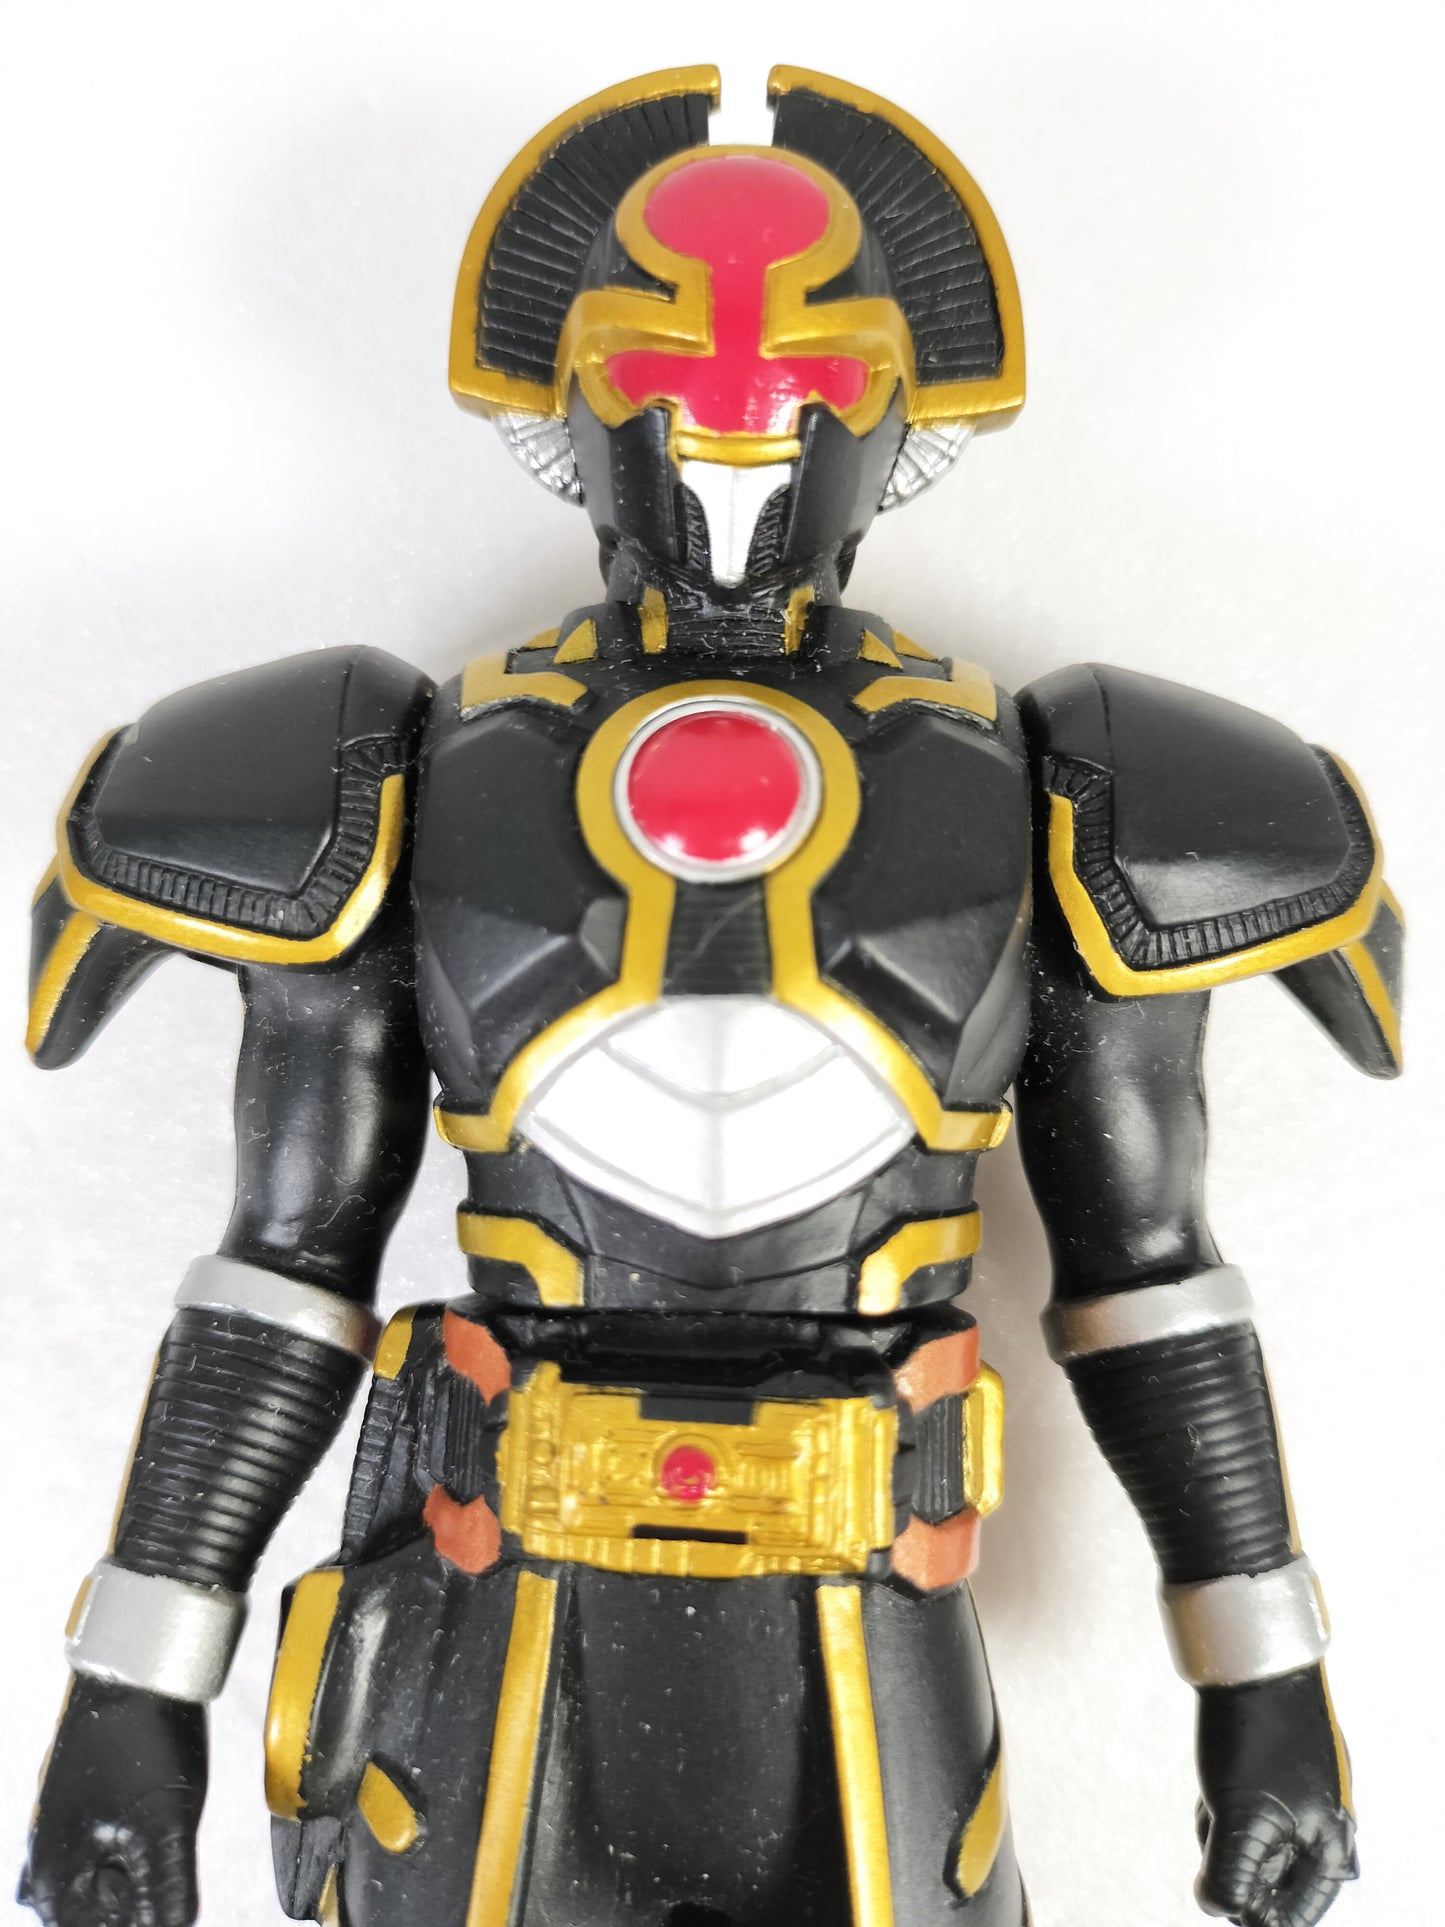 Kamen Rider Ogre Mask Rider Made in China Height about 17cm Manufactured in 2004 Sofvi Figure retro vintage major scratches and dirt